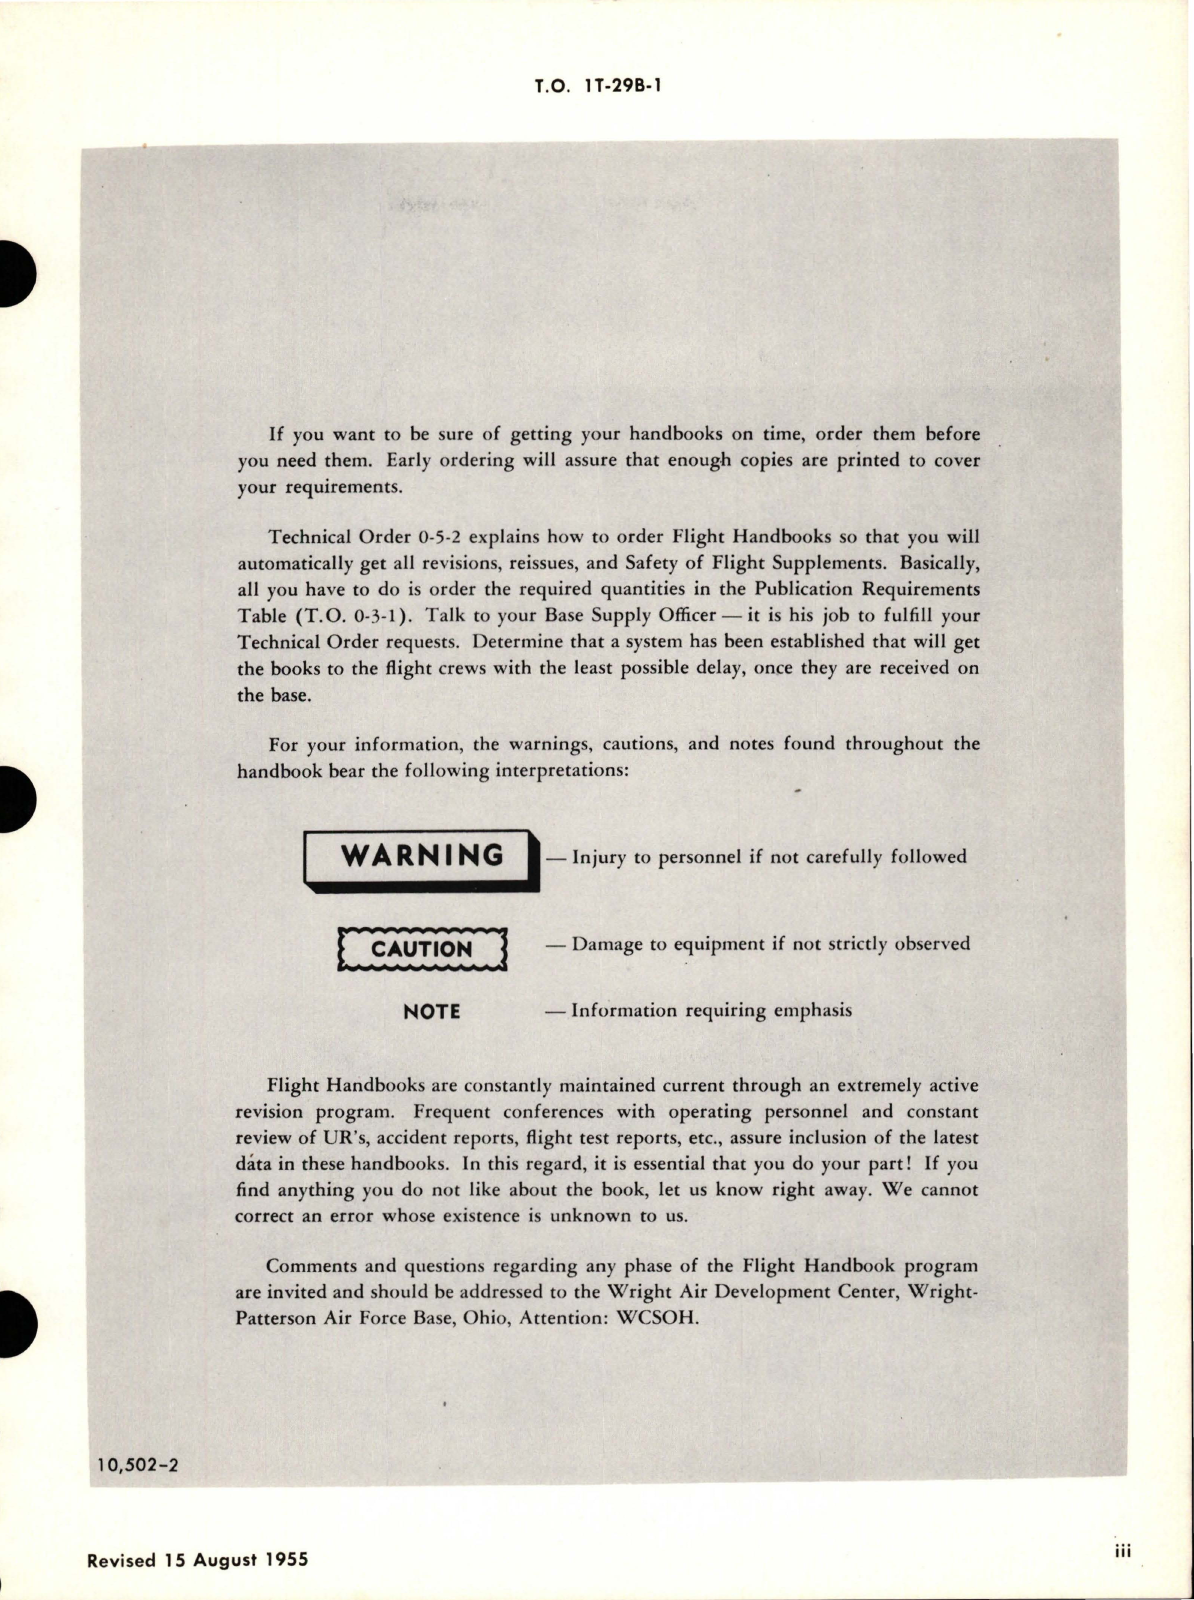 Sample page 5 from AirCorps Library document: Flight Handbook for T-29B